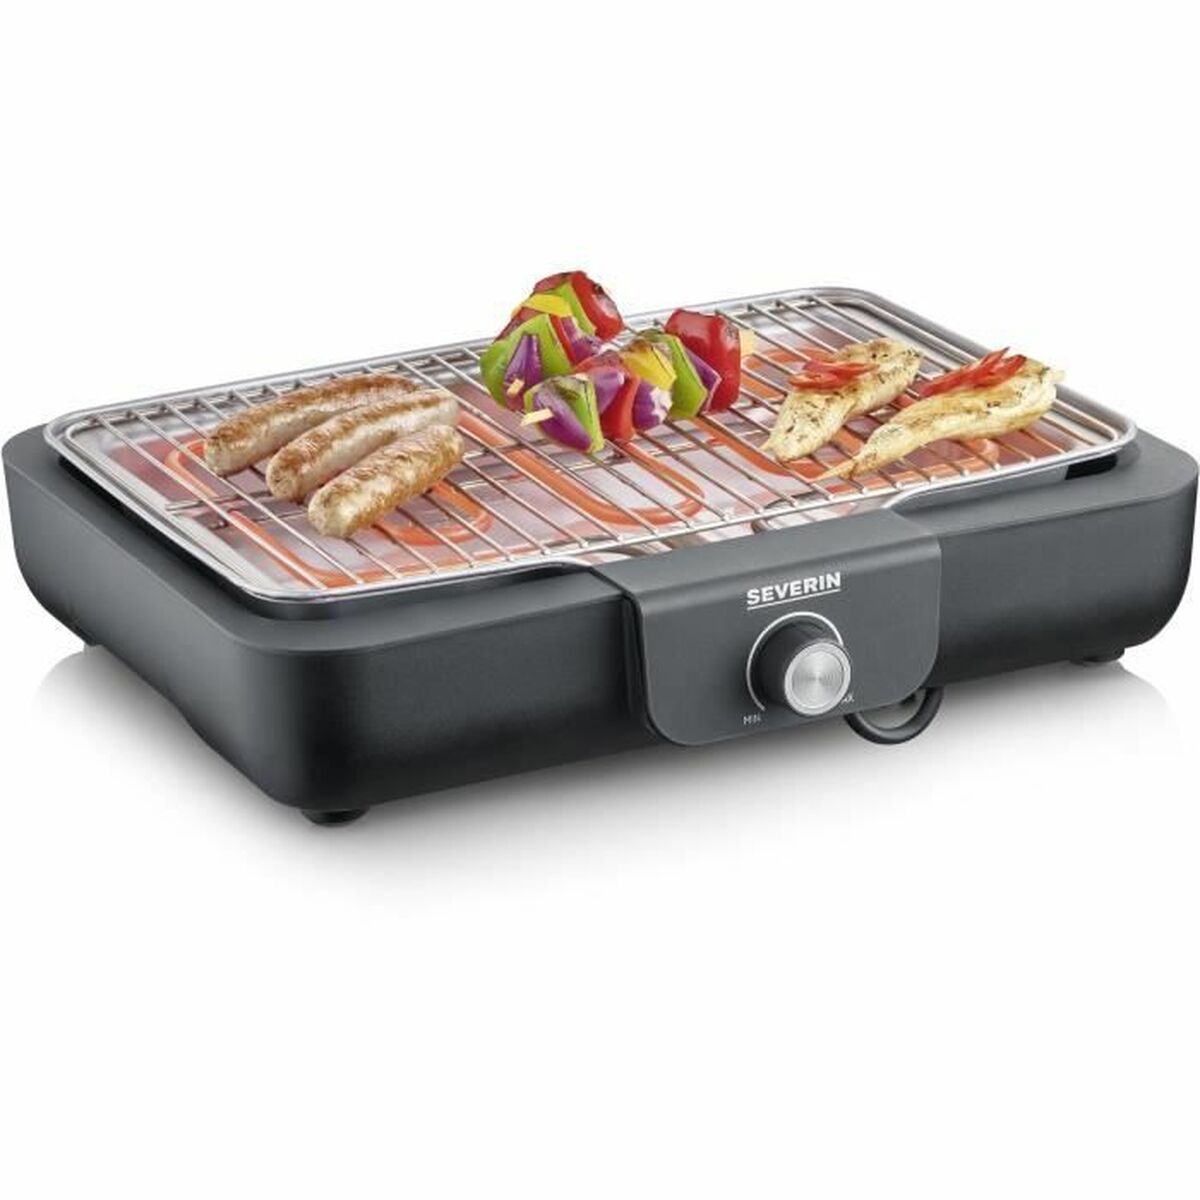 Barbecue Portable Severin PG 8554 Stainless steel 29 x 37 cm